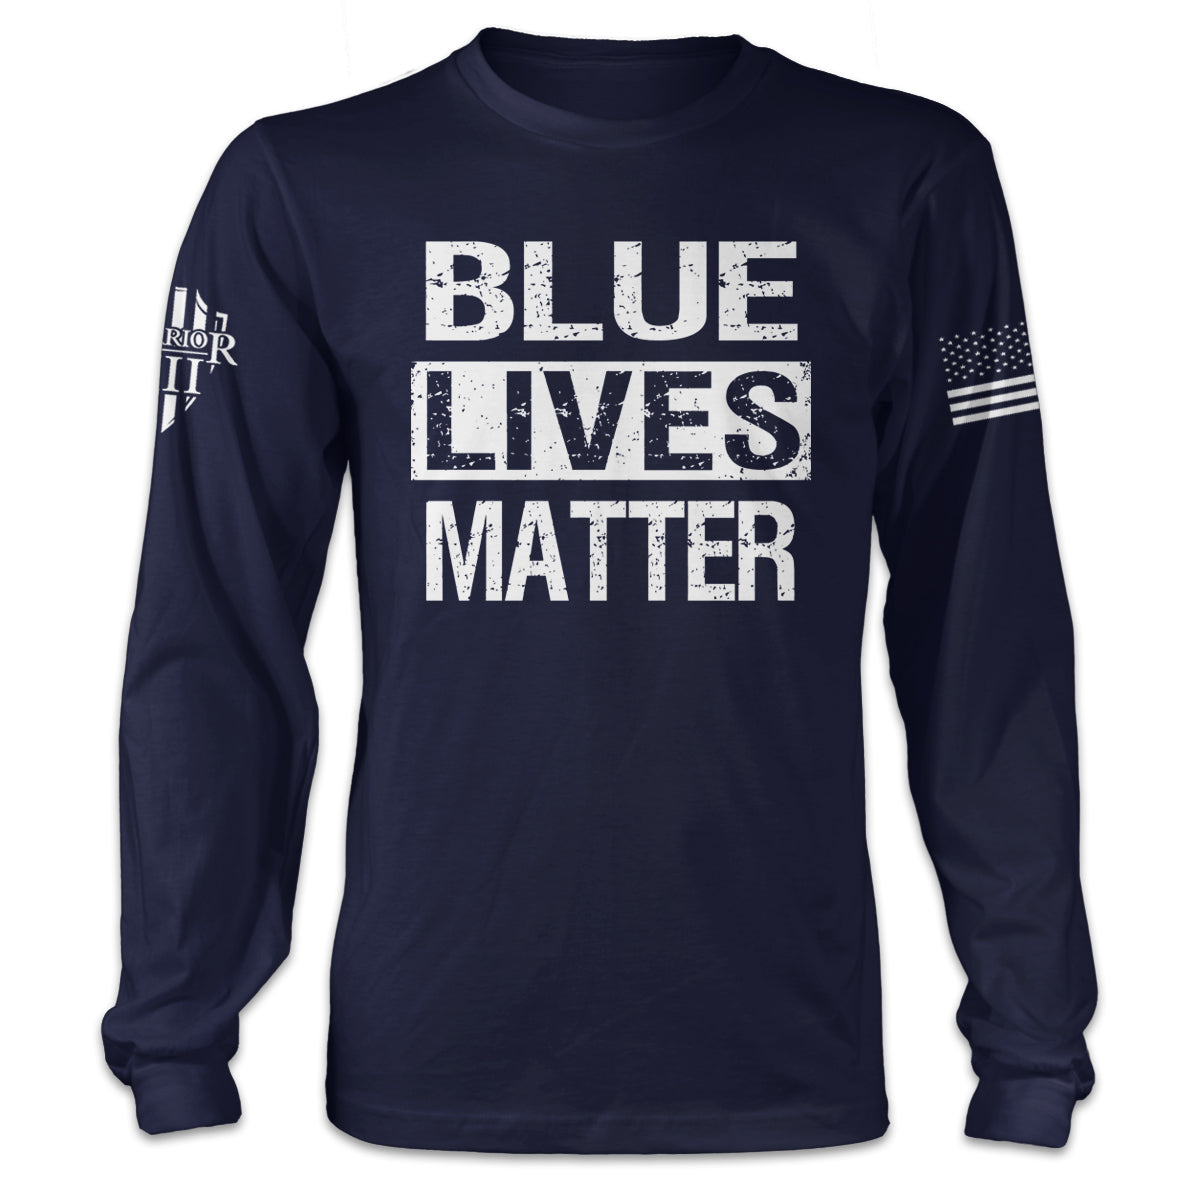 A navy blue long sleeve shirt with the words "Blue Lives Matter" printed on the front.